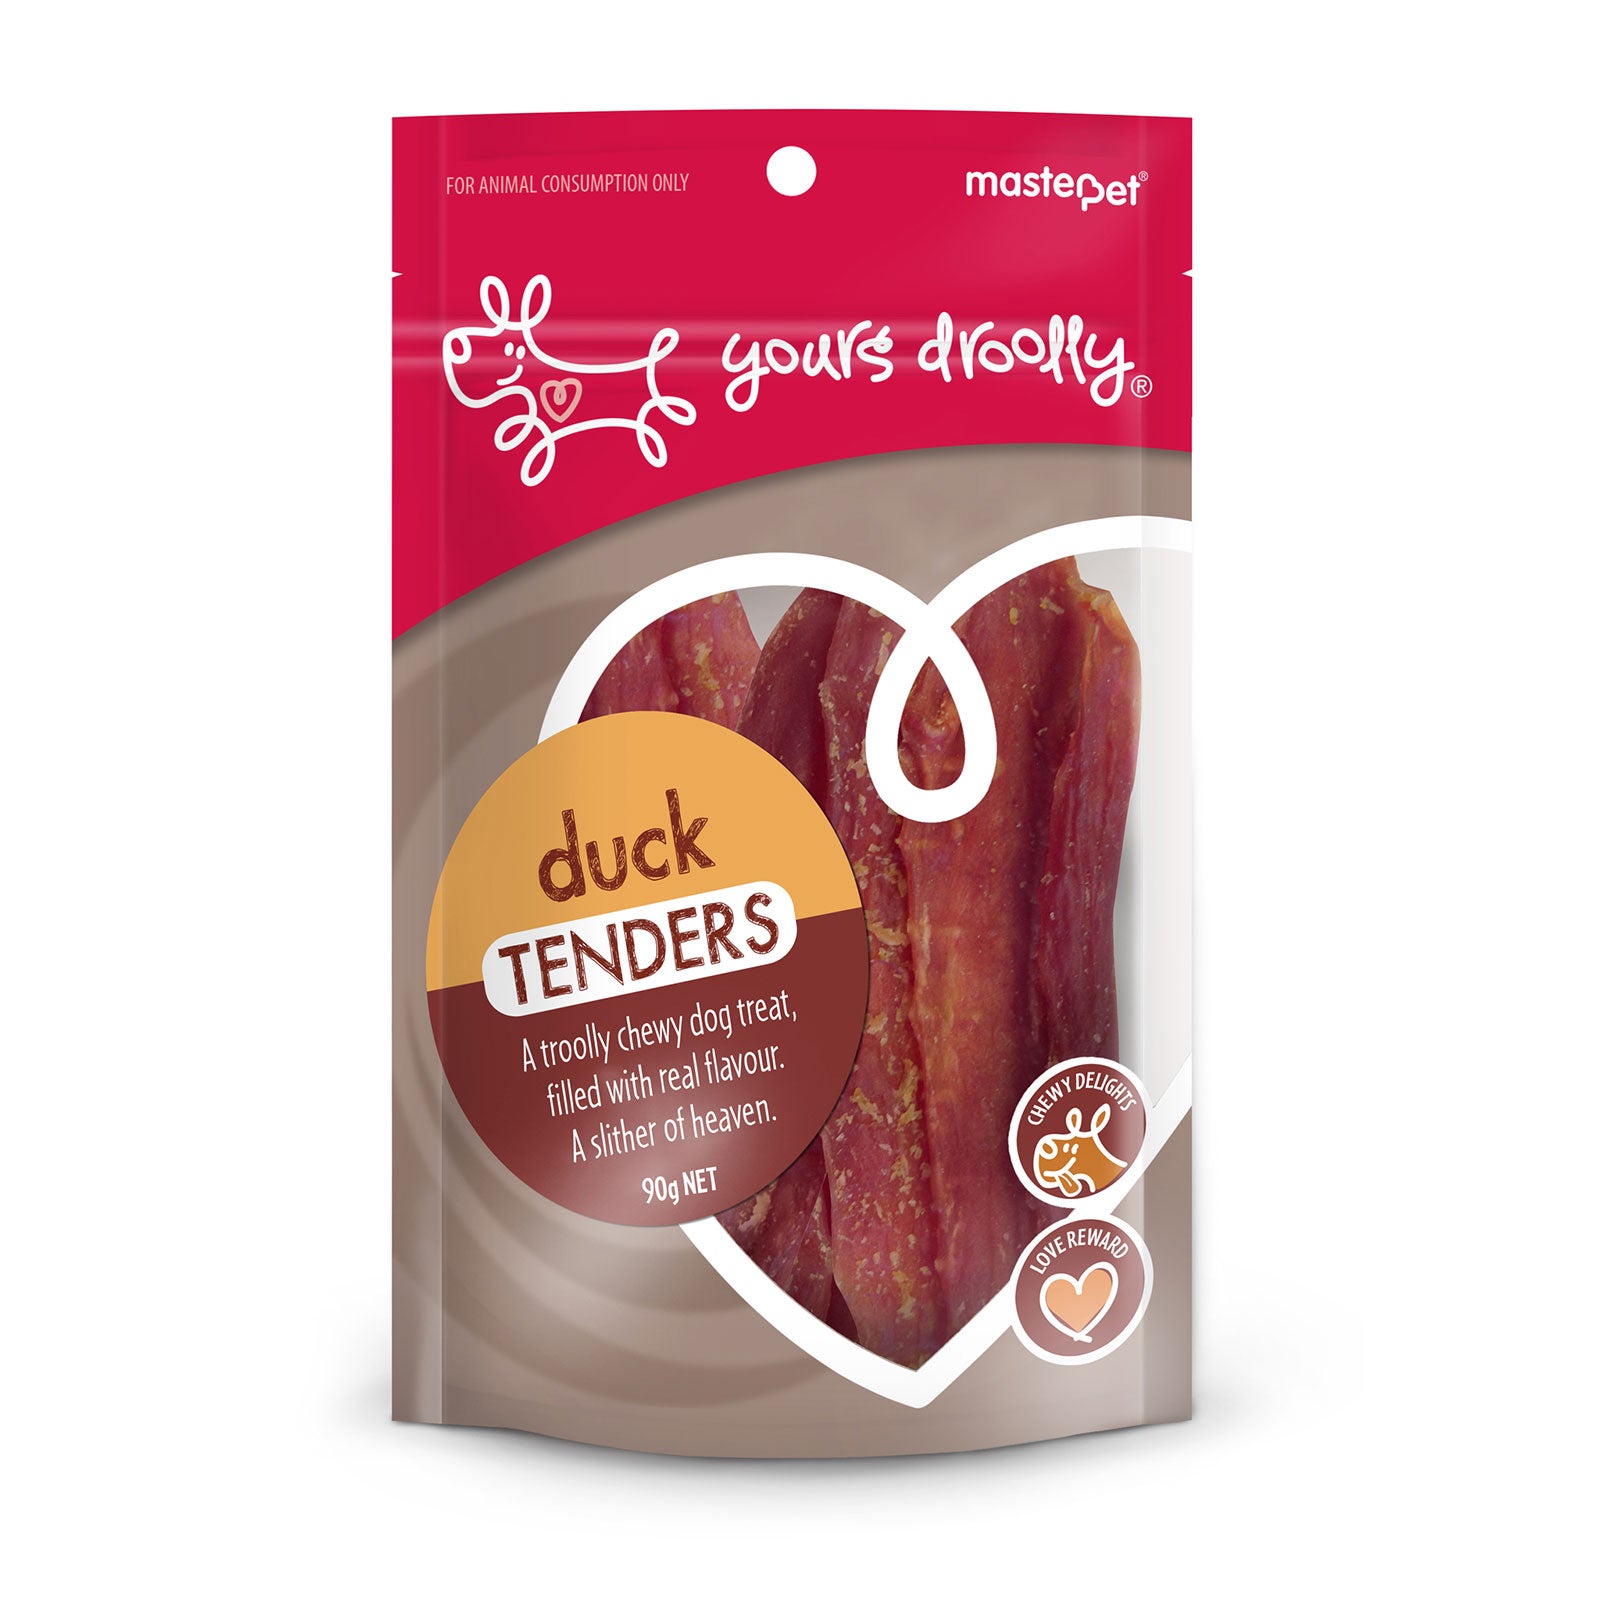 Yours Droolly Duck Tenders Dog Treat